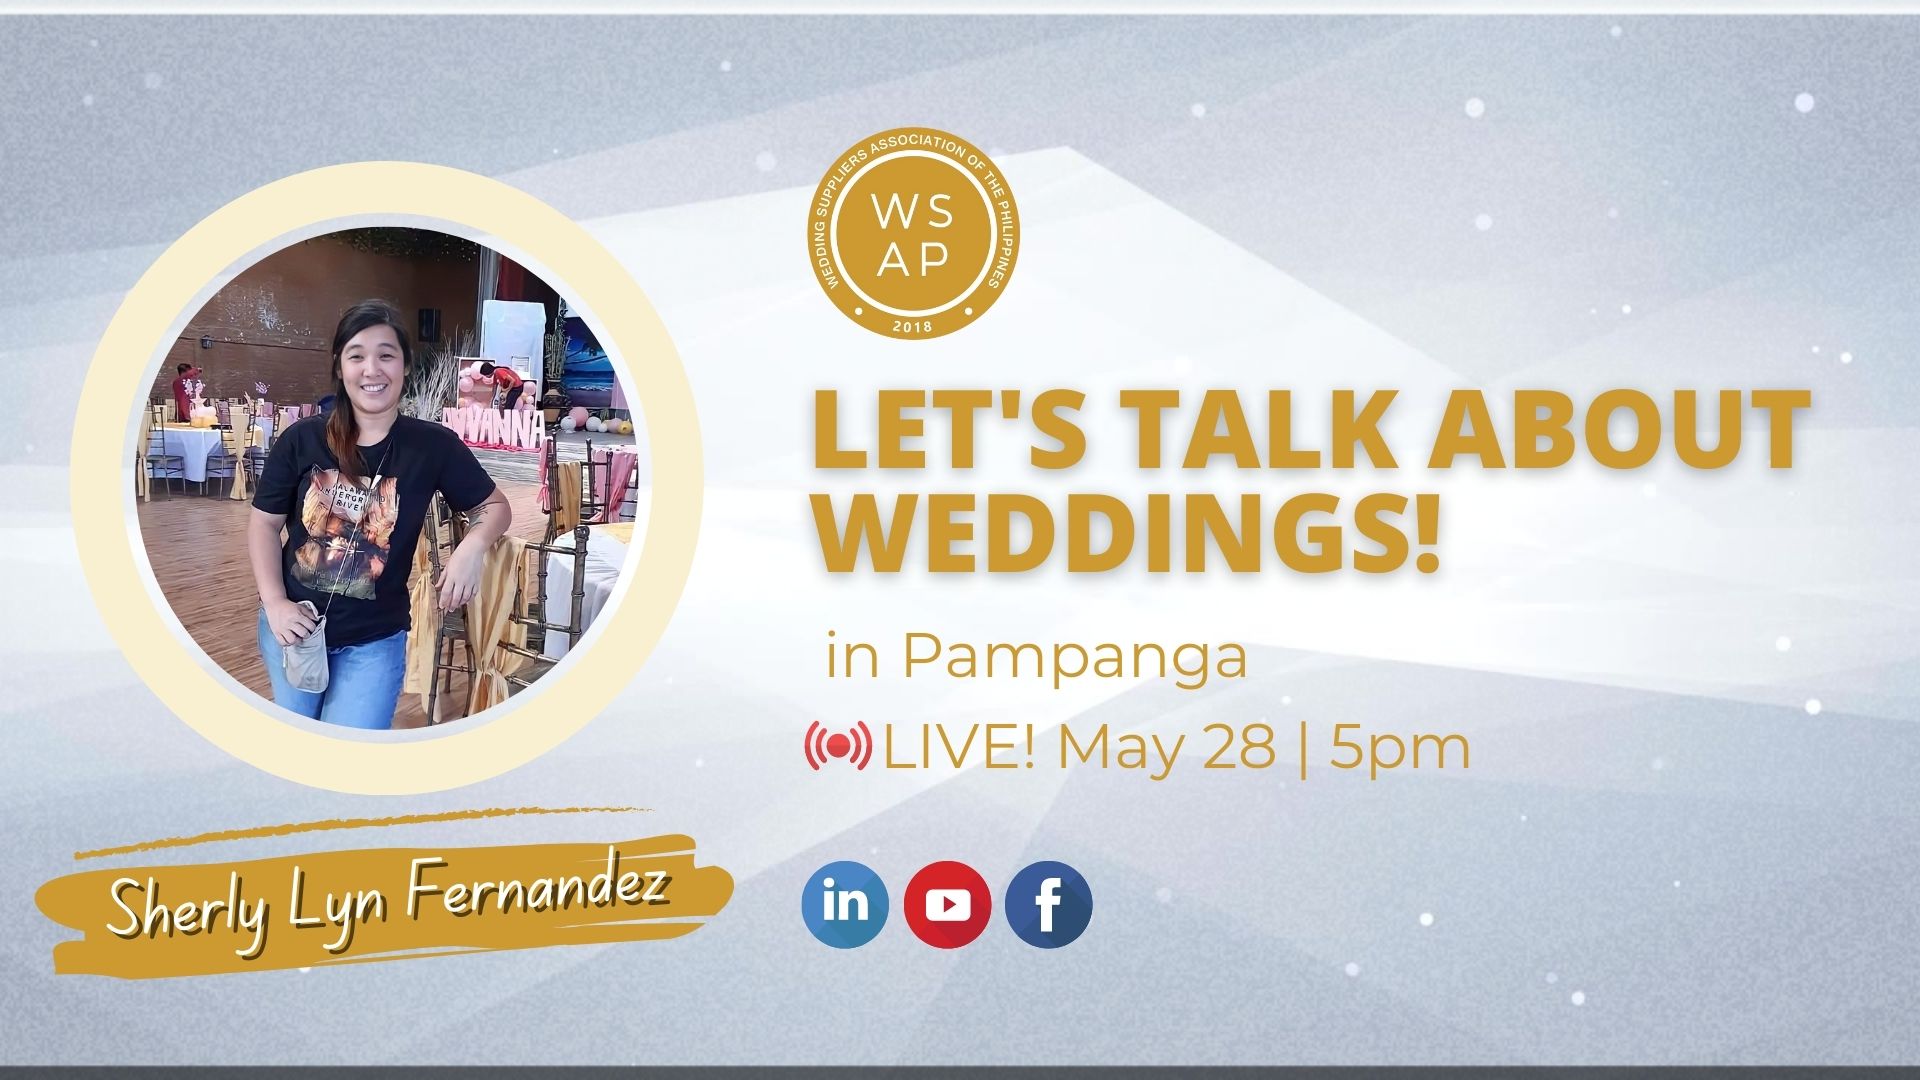 Let's Talk About Weddings in Pampanga with Sherly Lyn Fernandez